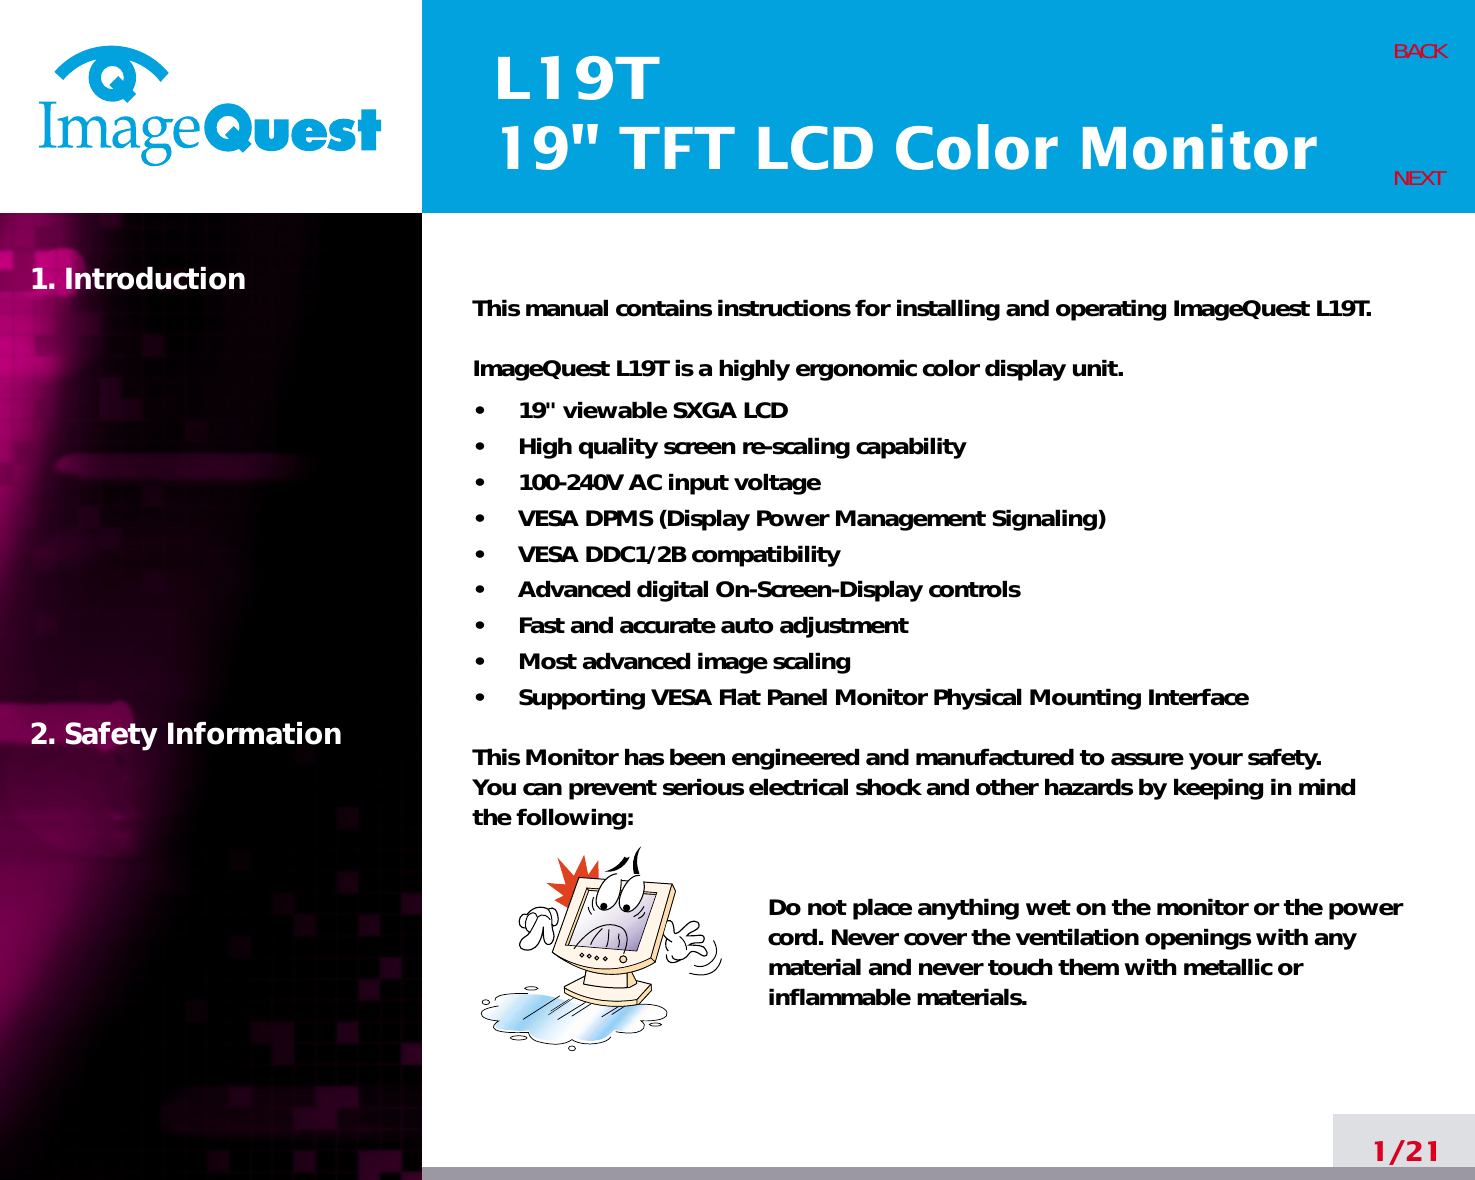 L19T19&quot; TFT LCD Color Monitor1. Introduction2. Safety Information1/21BACKNEXTThis manual contains instructions for installing and operating ImageQuest L19T.ImageQuest L19T is a highly ergonomic color display unit.•     19&quot; viewable SXGA LCD•     High quality screen re-scaling capability•     100-240V AC input voltage•     VESA DPMS (Display Power Management Signaling)•     VESA DDC1/2B compatibility•     Advanced digital On-Screen-Display controls•     Fast and accurate auto adjustment  •     Most advanced image scaling•     Supporting VESA Flat Panel Monitor Physical Mounting InterfaceThis Monitor has been engineered and manufactured to assure your safety. You can prevent serious electrical shock and other hazards by keeping in mind the following:Do not place anything wet on the monitor or the powercord. Never cover the ventilation openings with anymaterial and never touch them with metallic or inflammable materials.